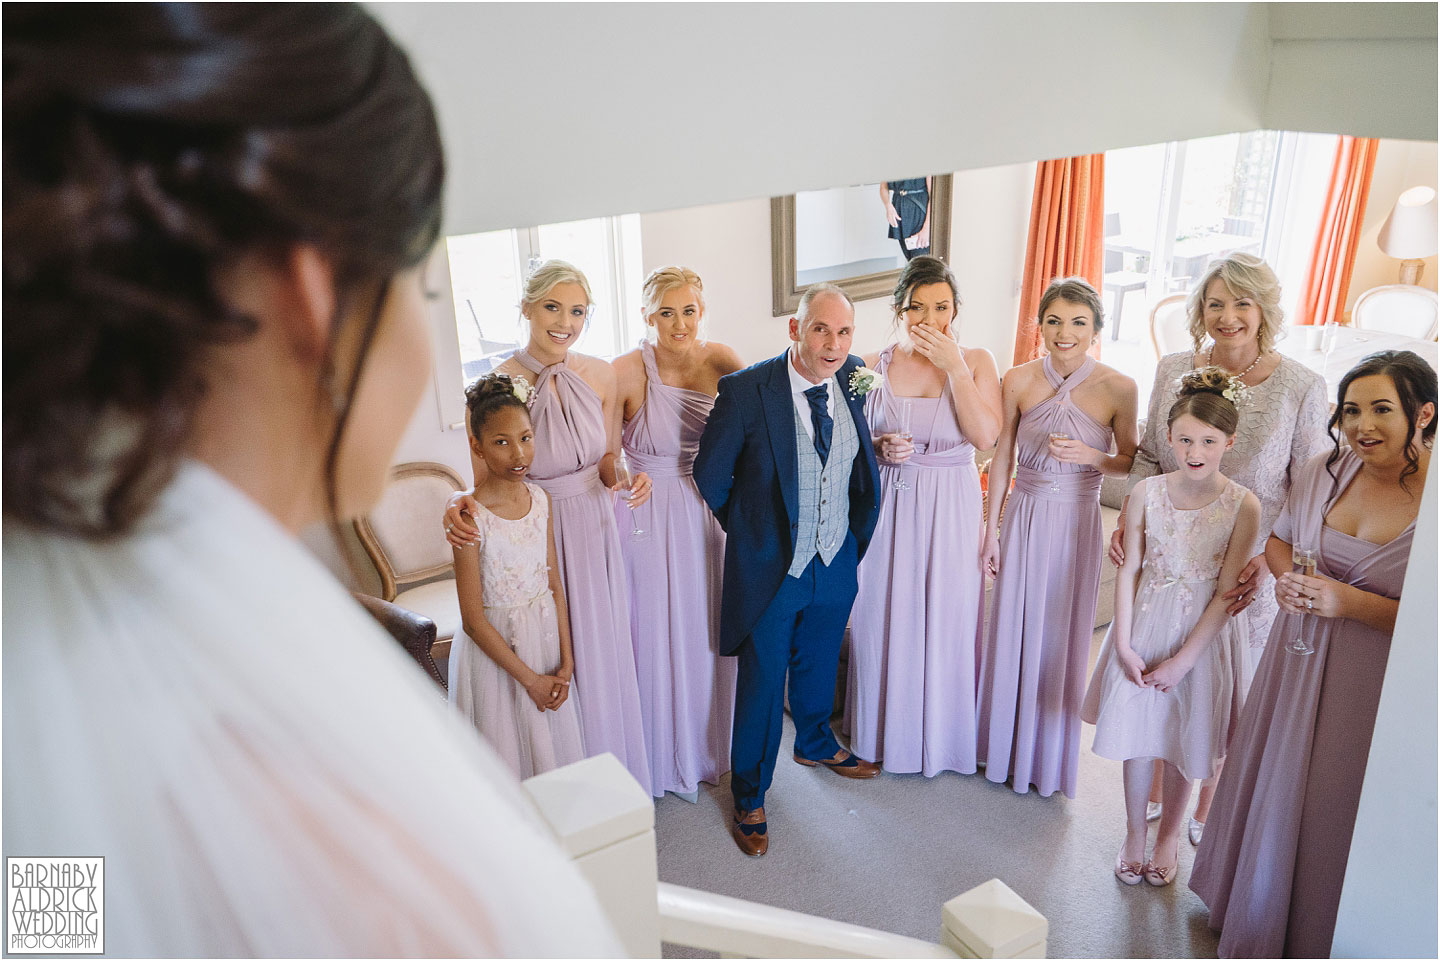 Father of the bride moment, Dad sees bride, Priory Cottages Wedding Yorkshire